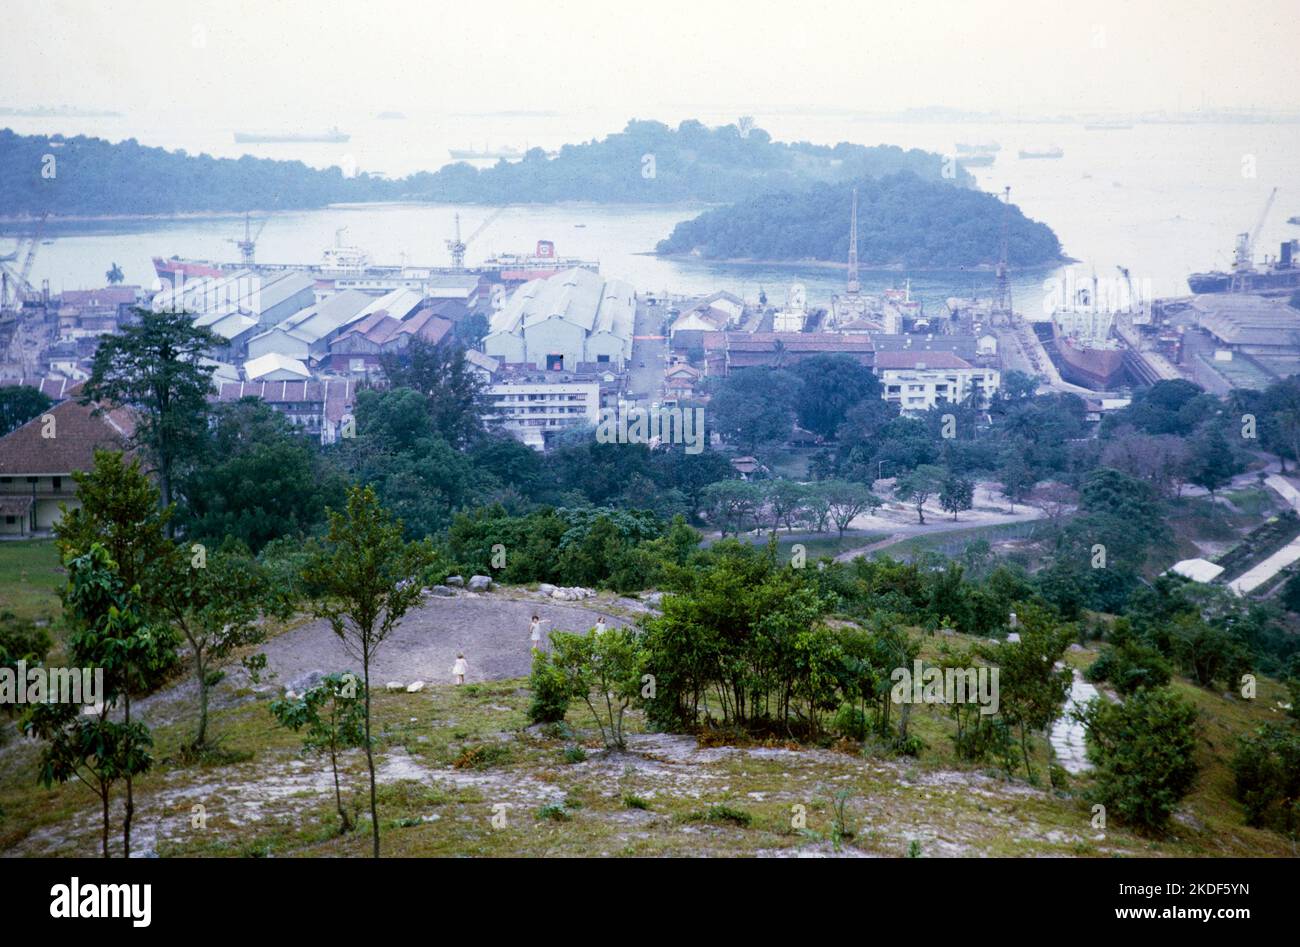 Shipping and docks at Keppel harbour from Mount Faber, Singapore, Asia 1971 Stock Photo